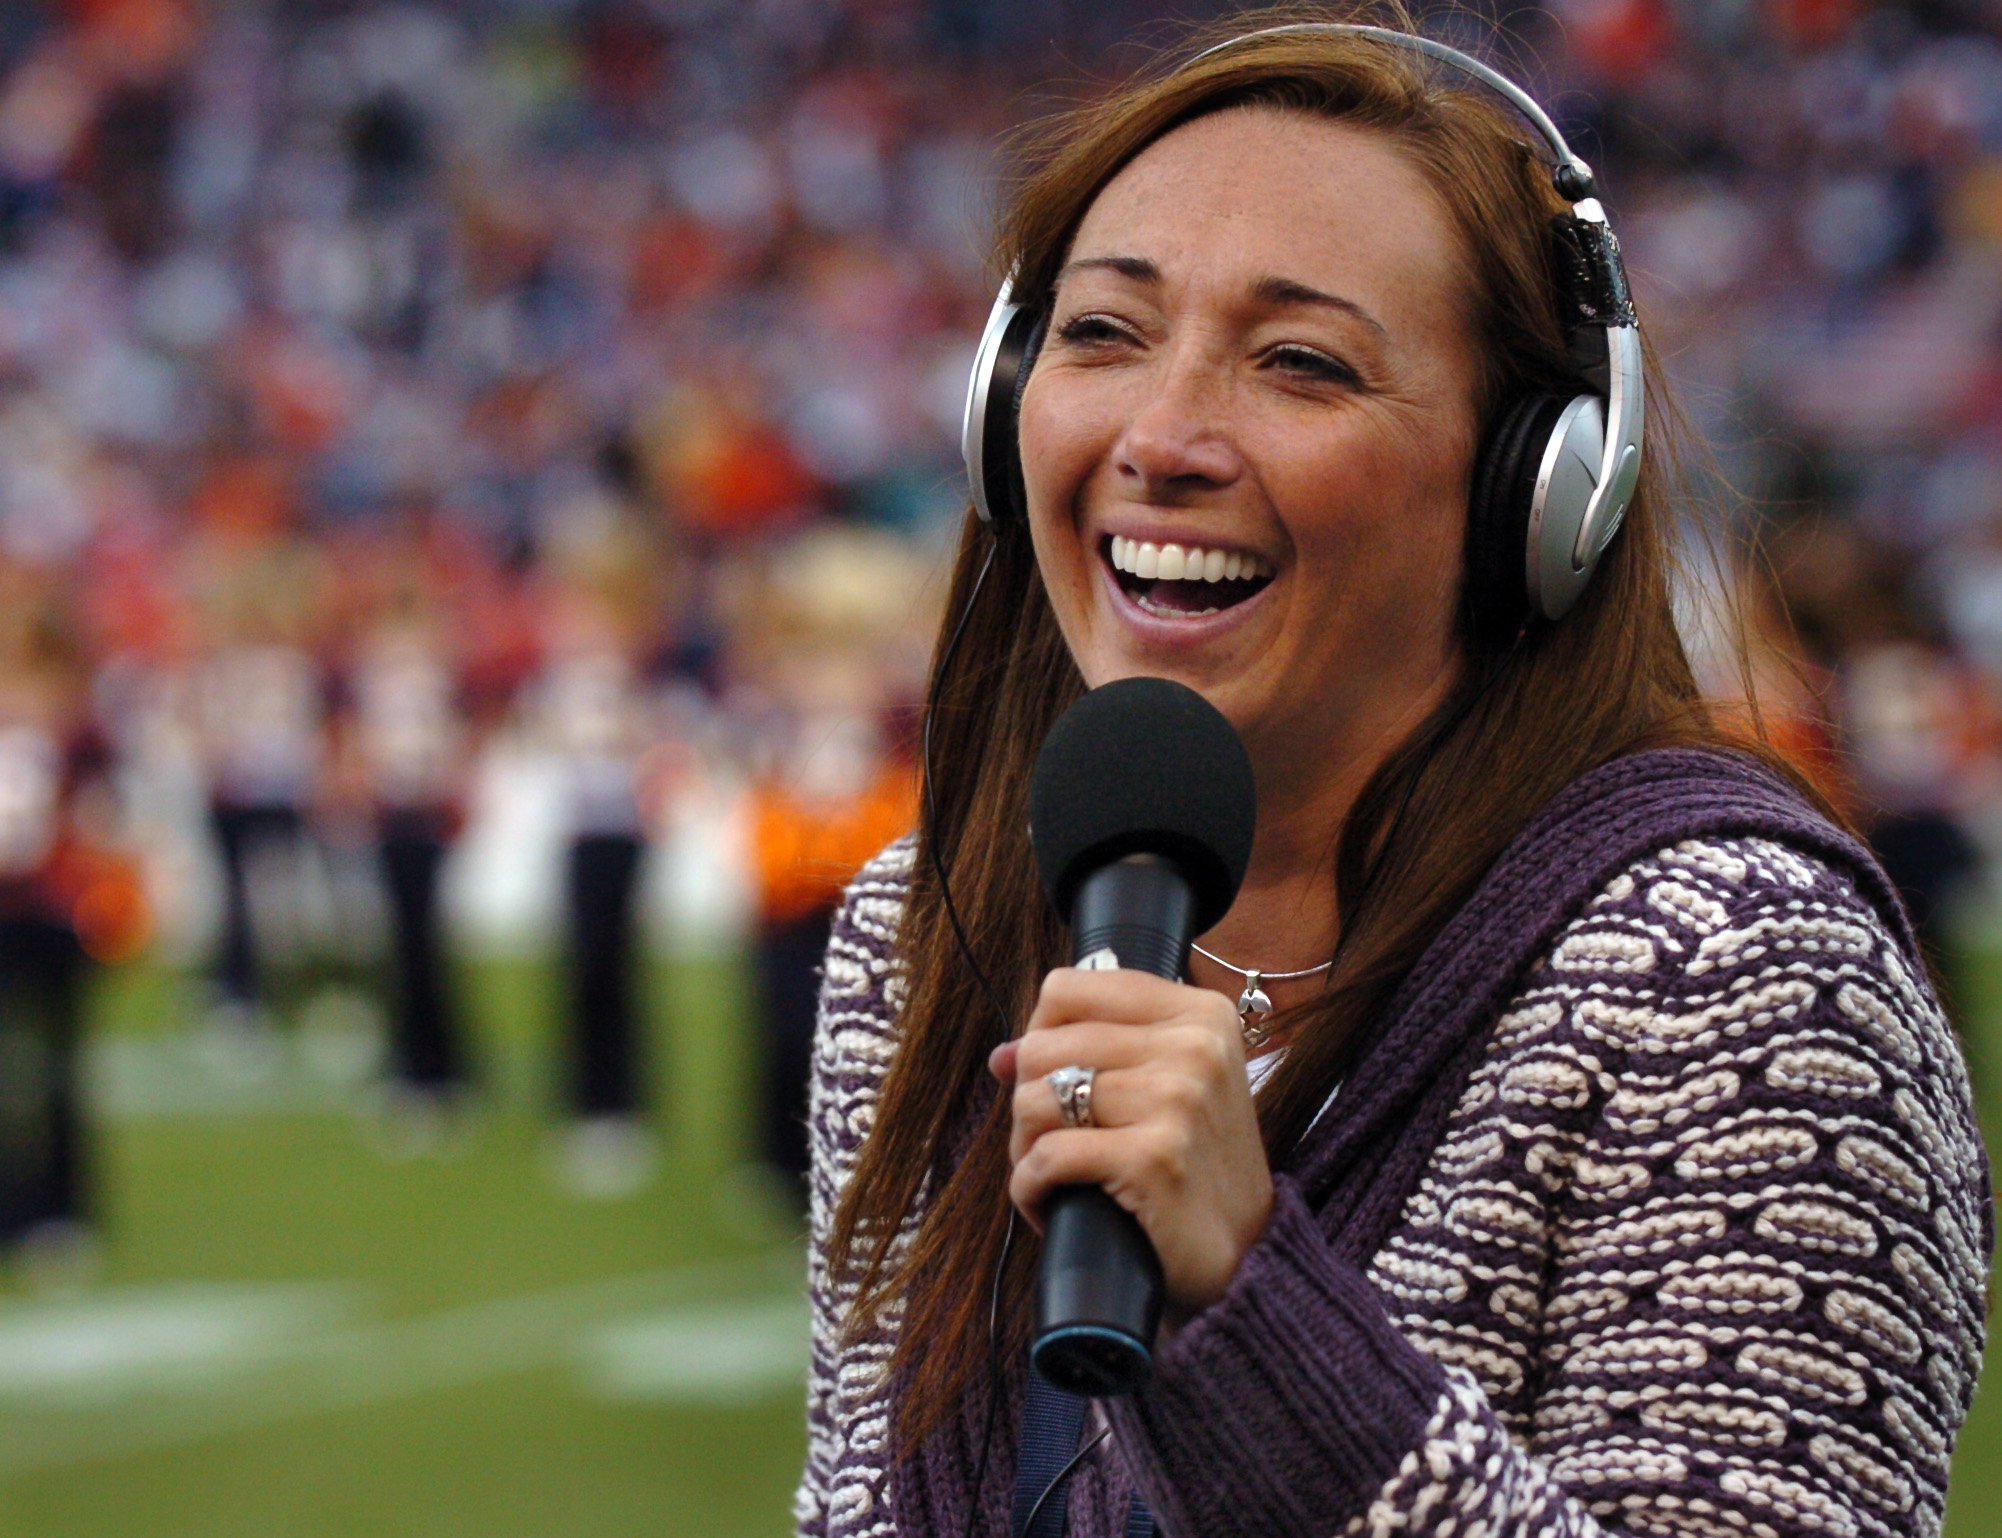 Amy Van Dyken reporting on the Broncos vs the San Diego Chargers on Sunday, October 7th, 2007 at Invesco Field. (Andy Cross--Denver Post via Getty Images)